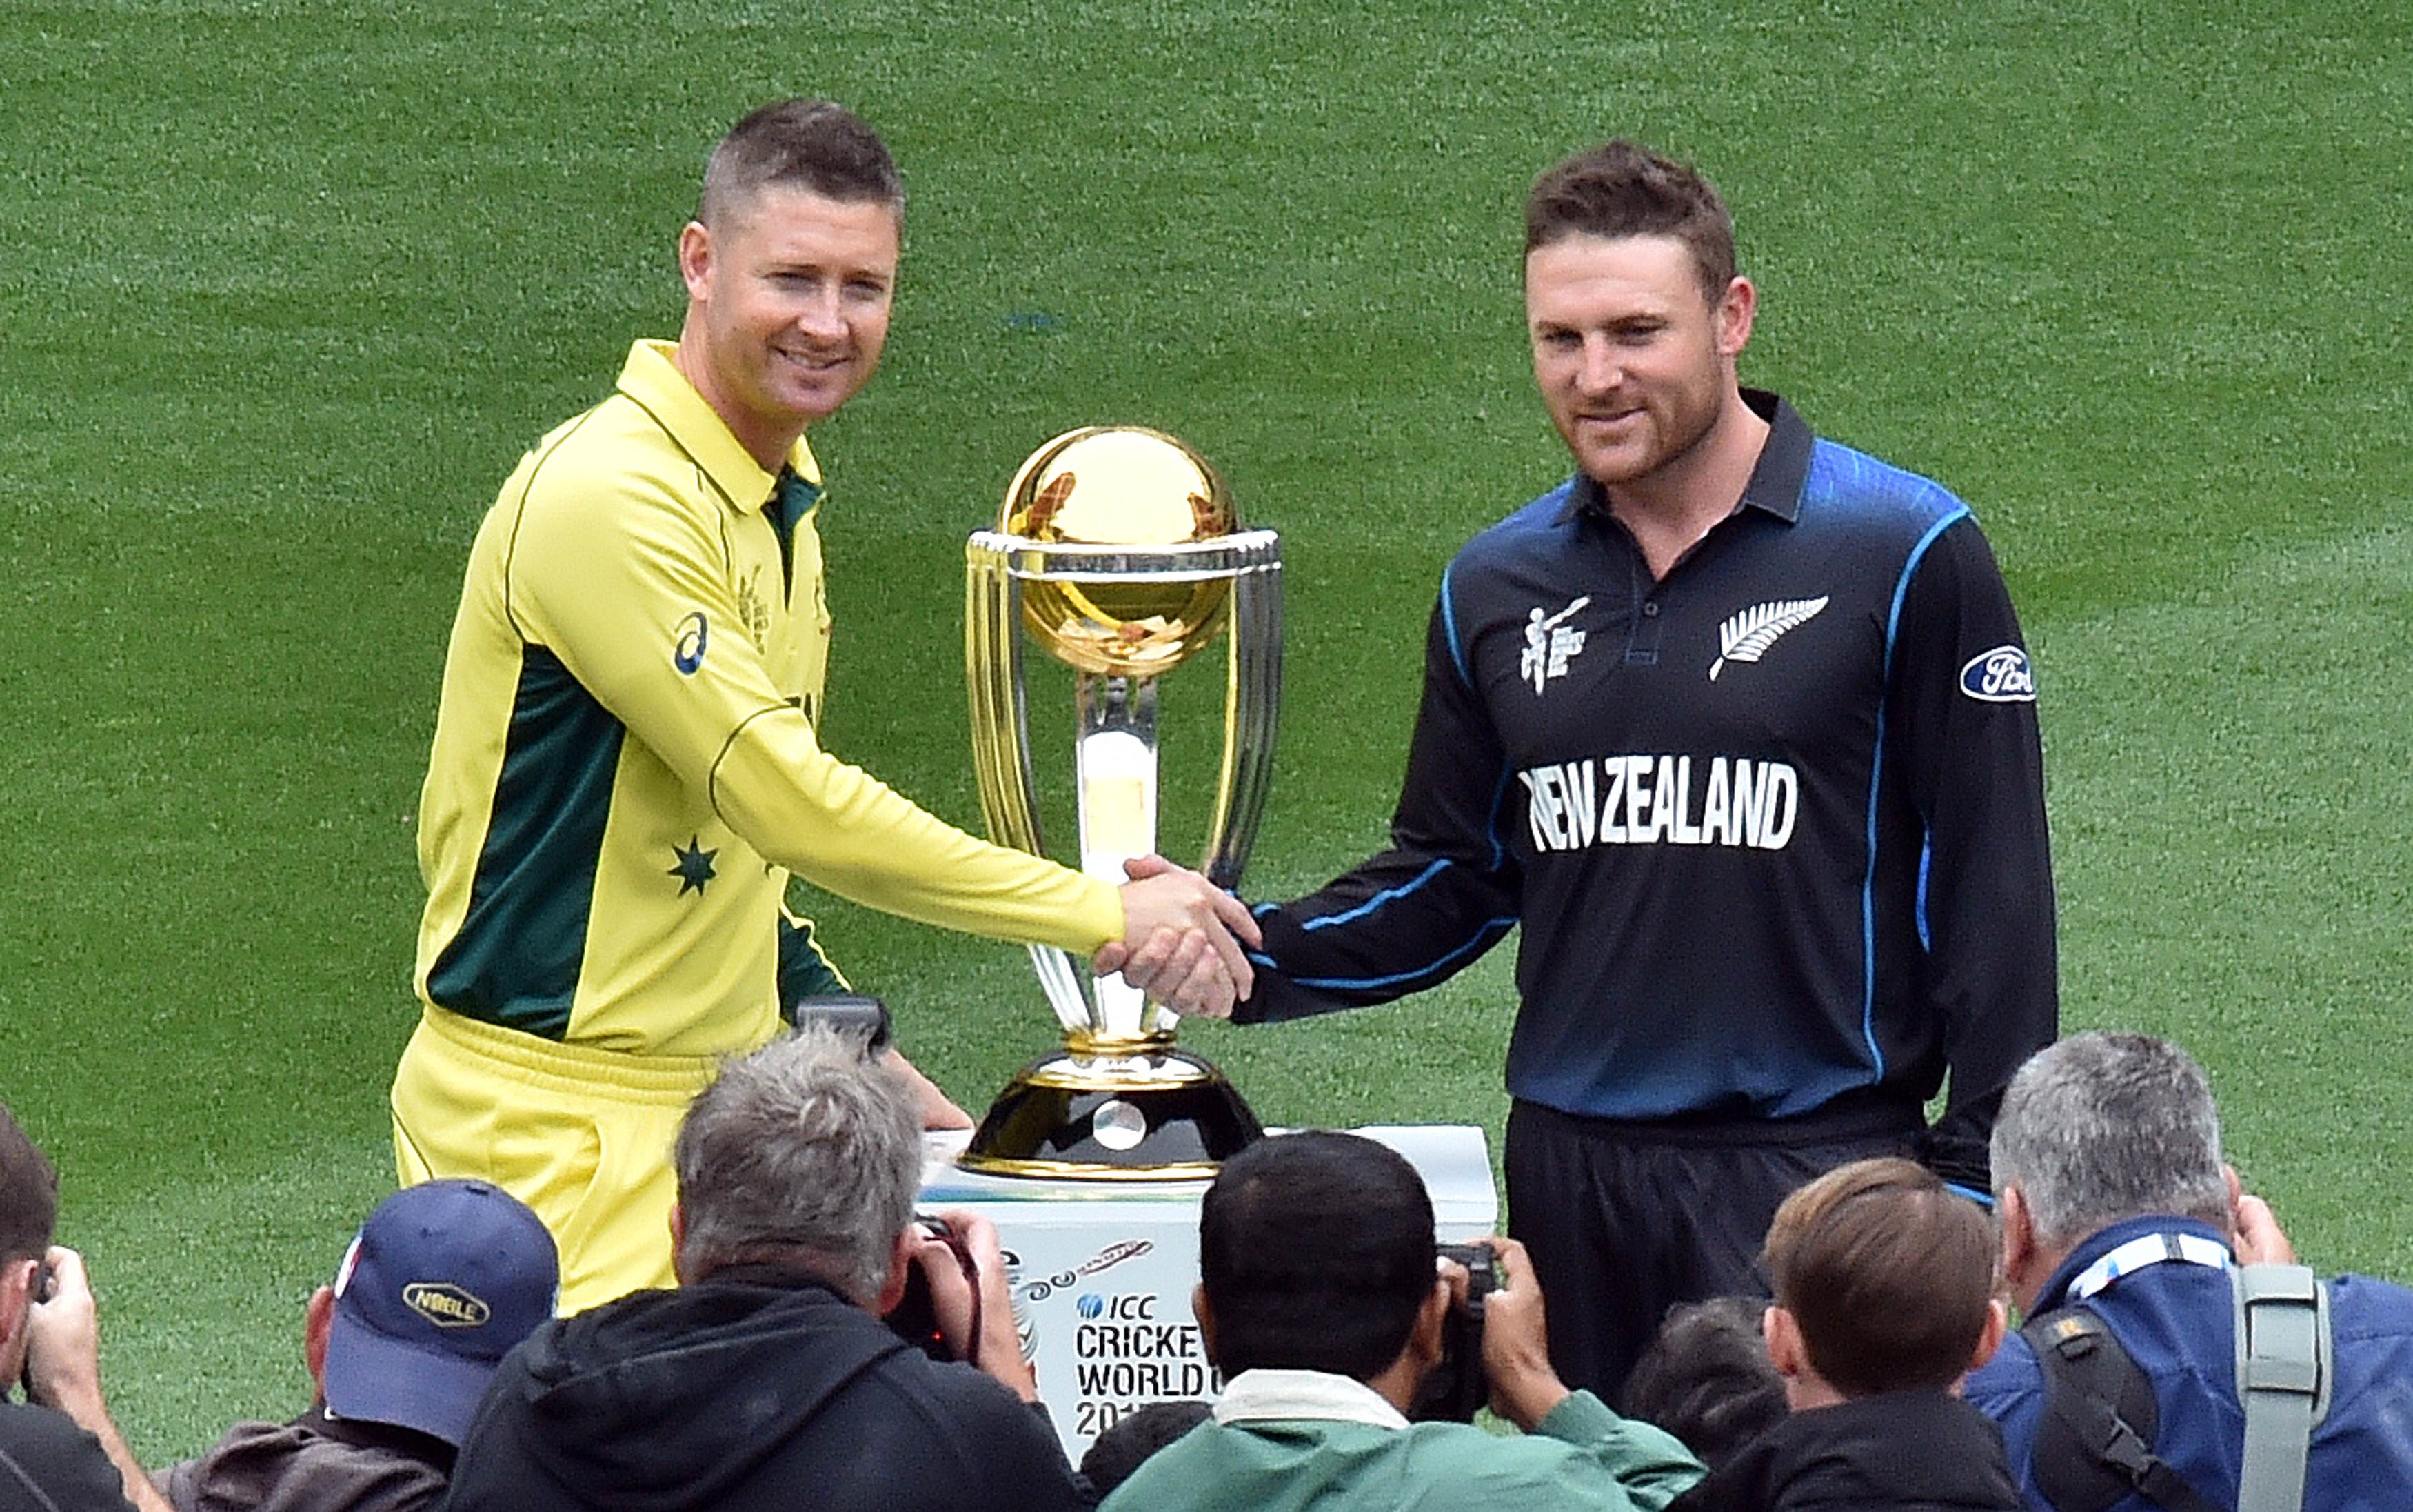 May the best man win: Rival captains Michael Clarke of Australia and Brendon McCullum of New Zealand shake hands ahead of the Cricket World Cup final in Melbourne. Photos: AFP